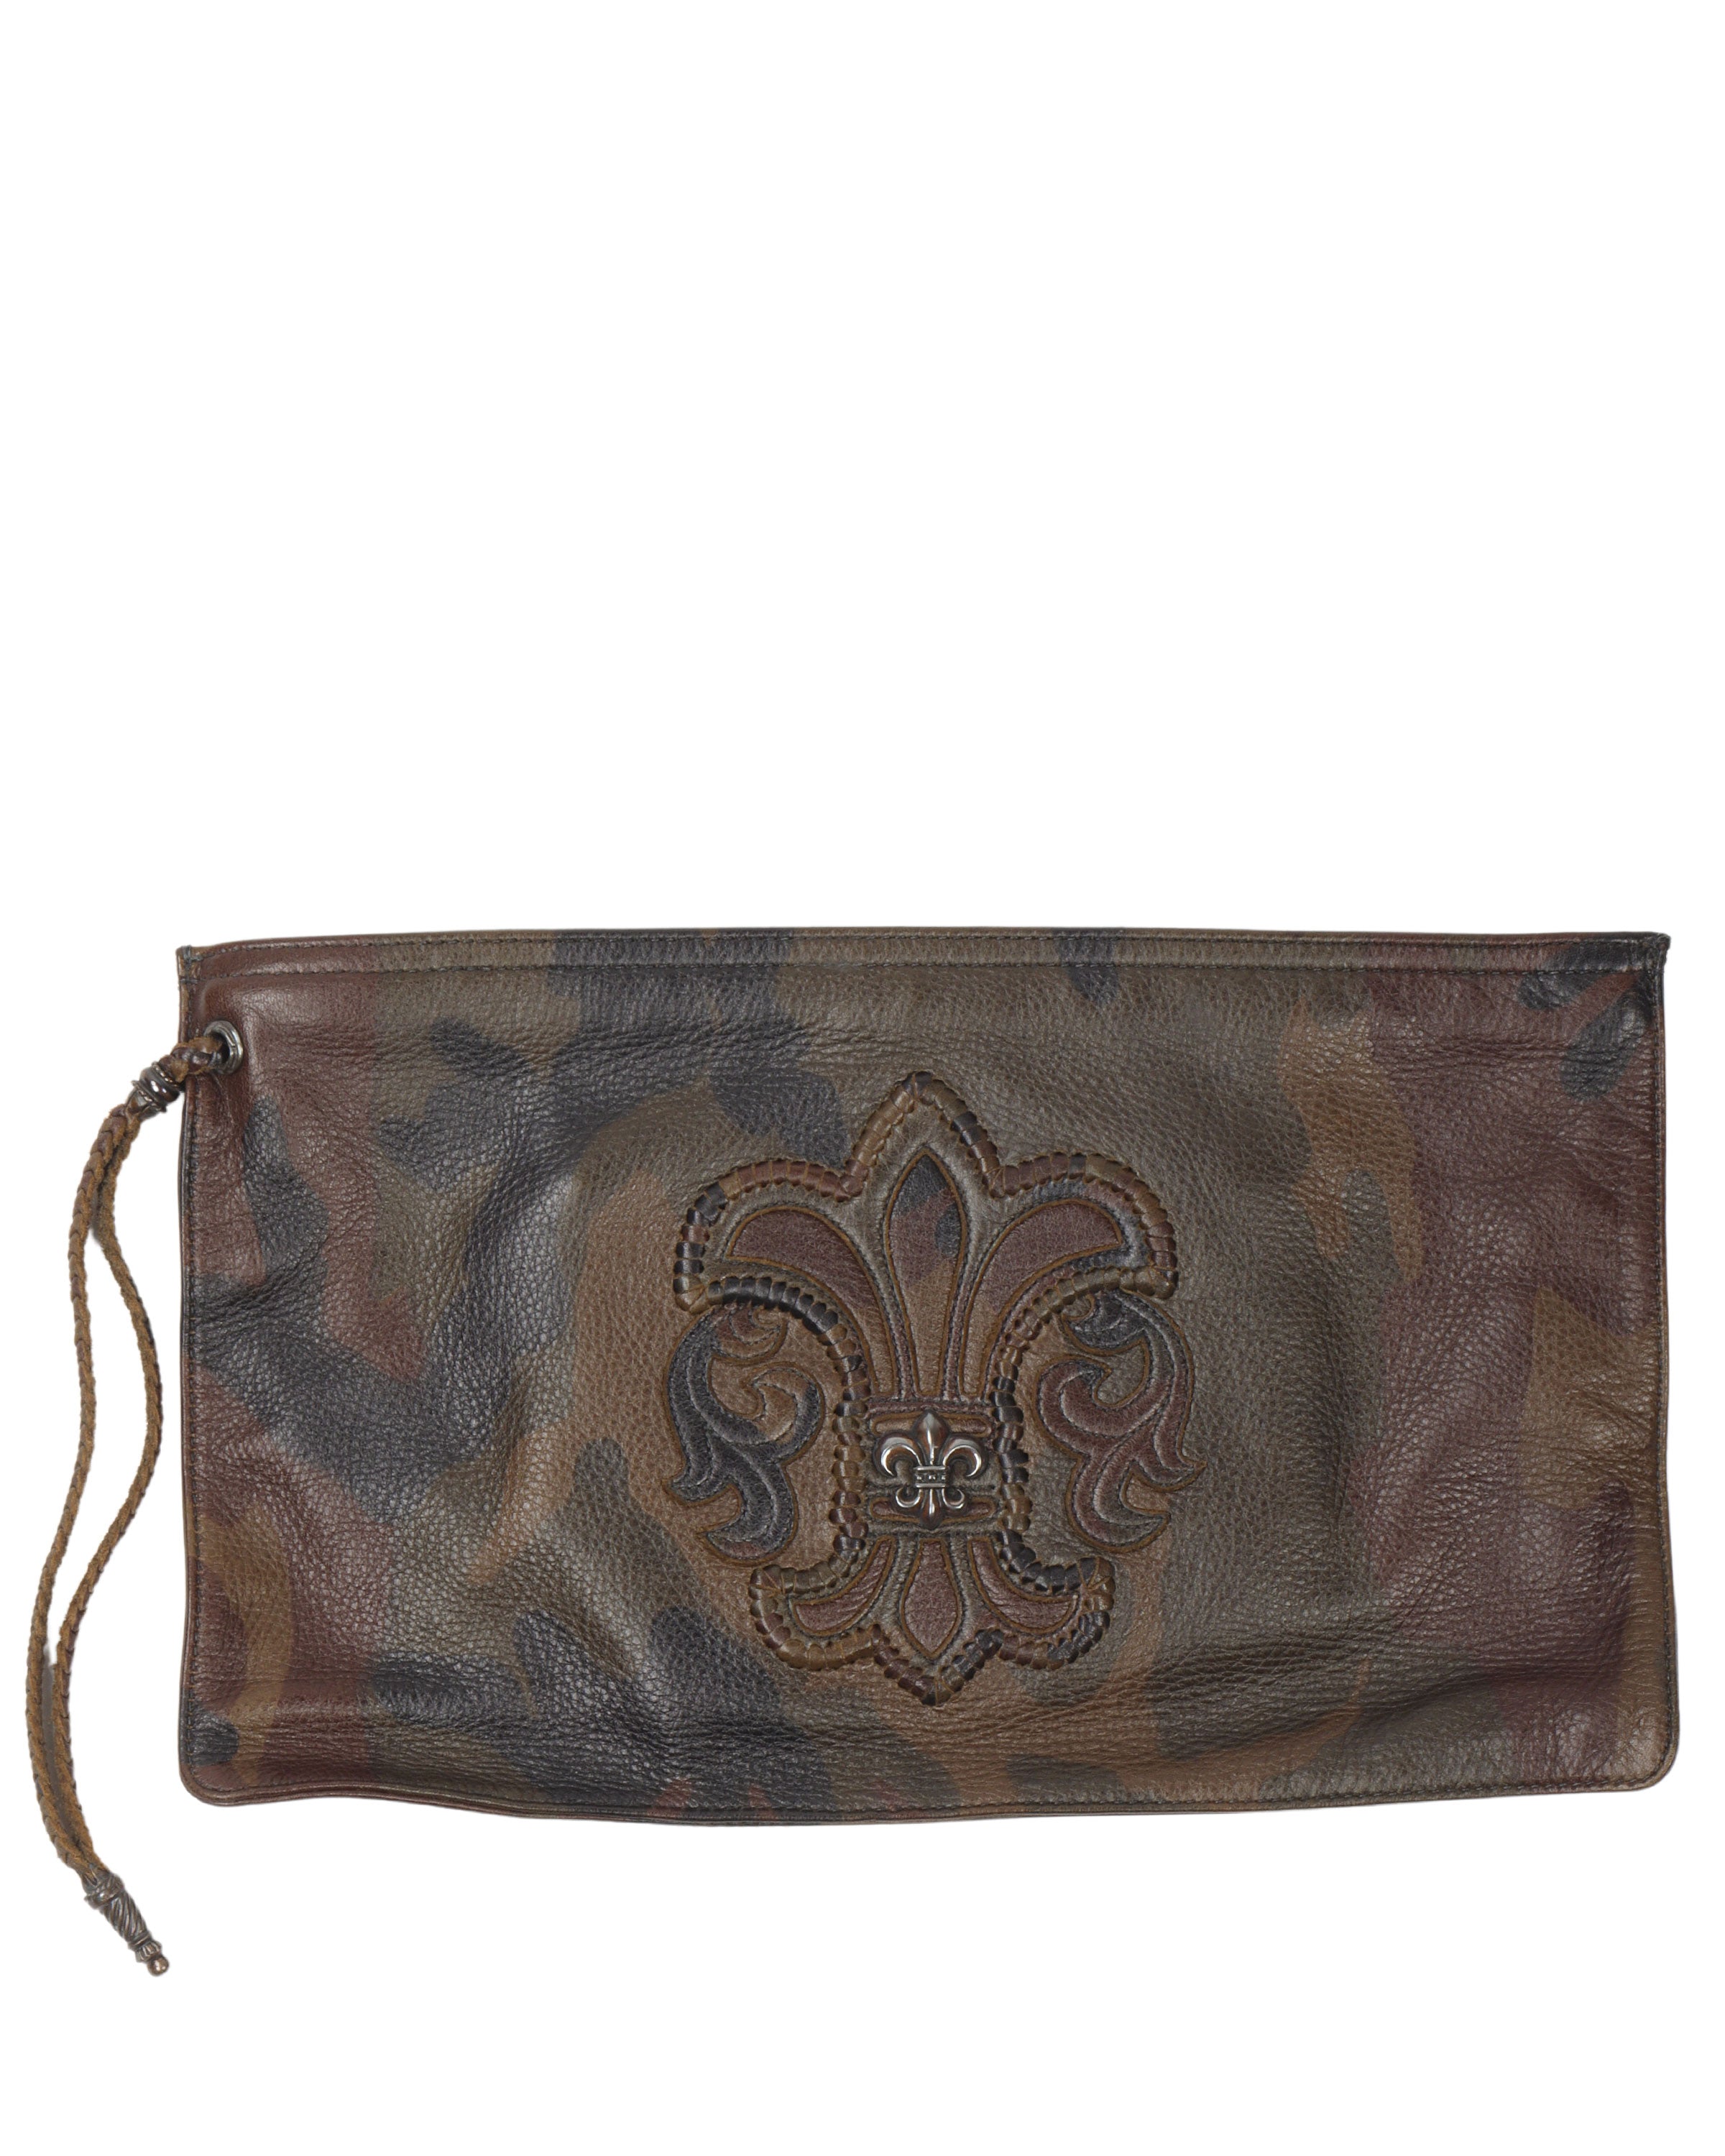 "Fleur" Camouflage Leather Pouch